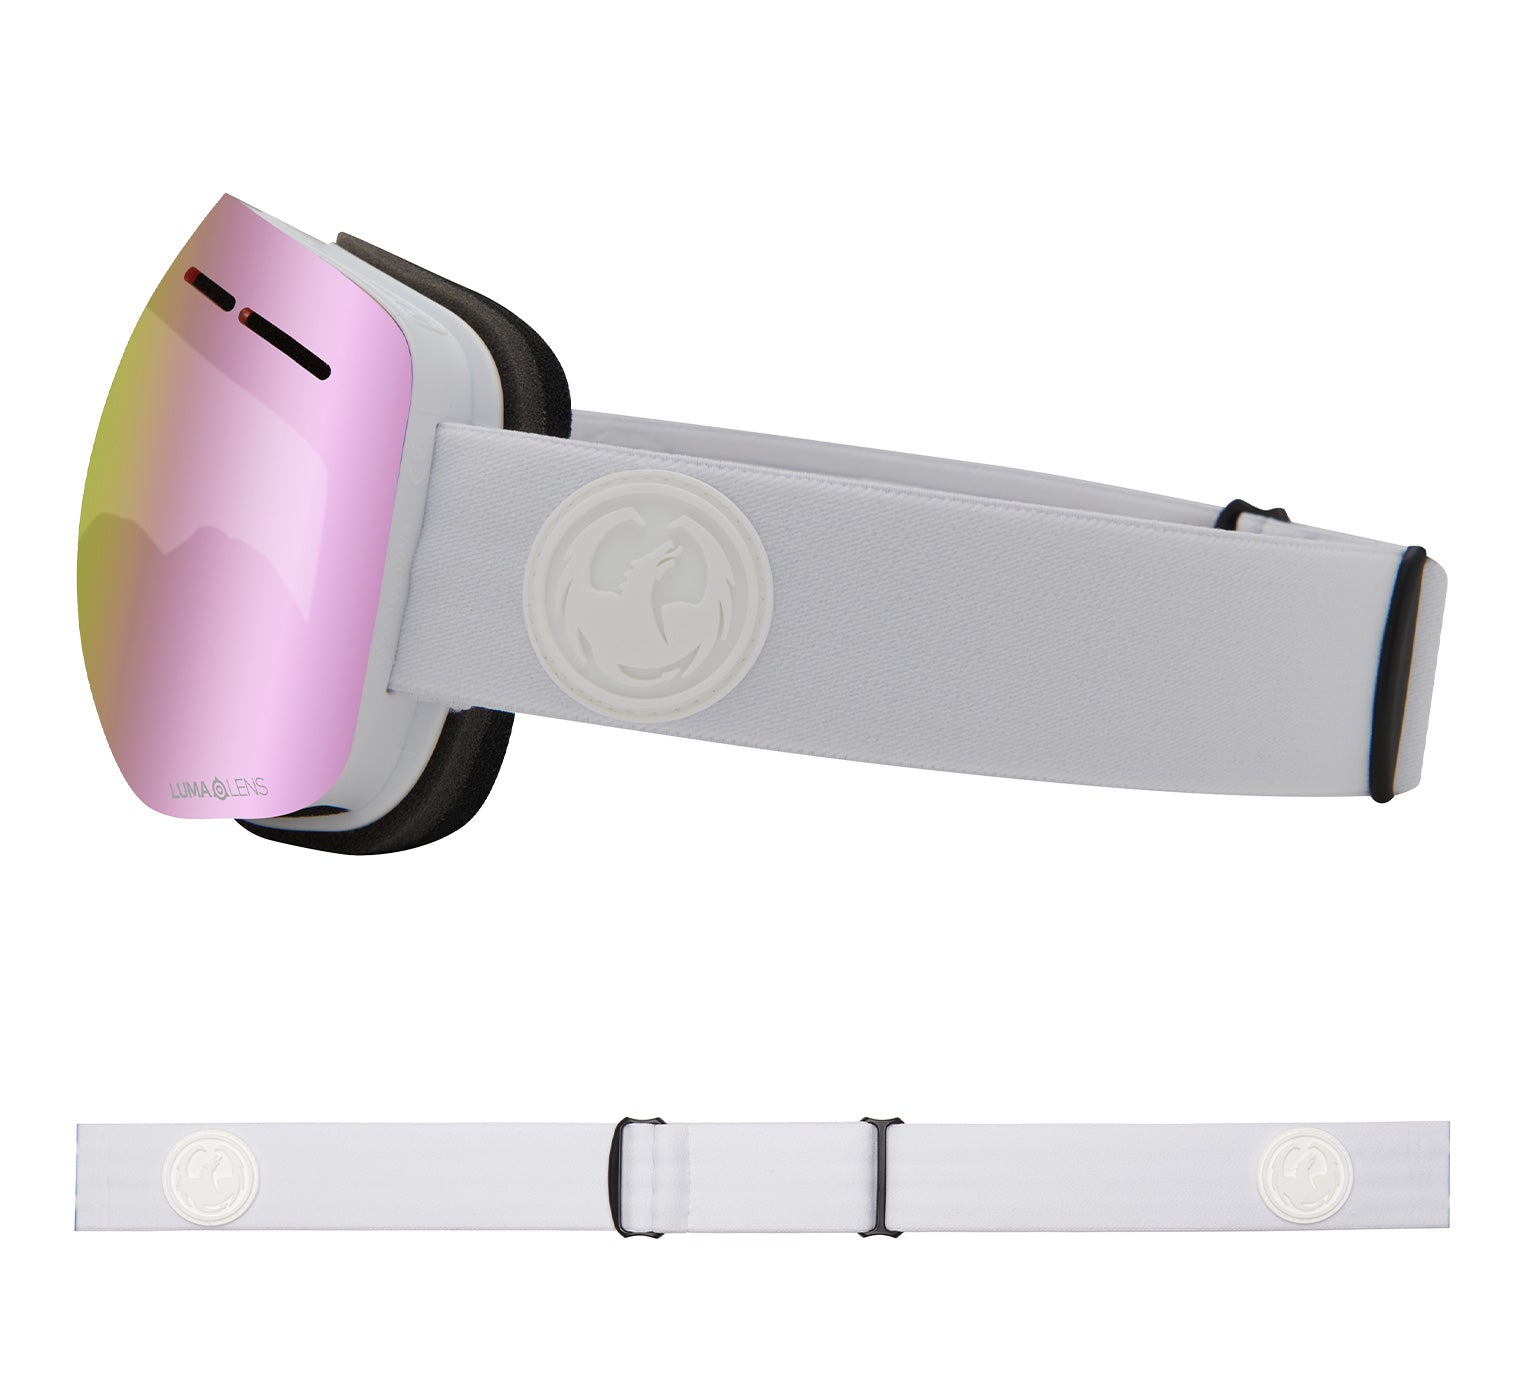 X1s - Whiteout with Lumalens Pink Ionized Lens DRG152-101 - Dragon